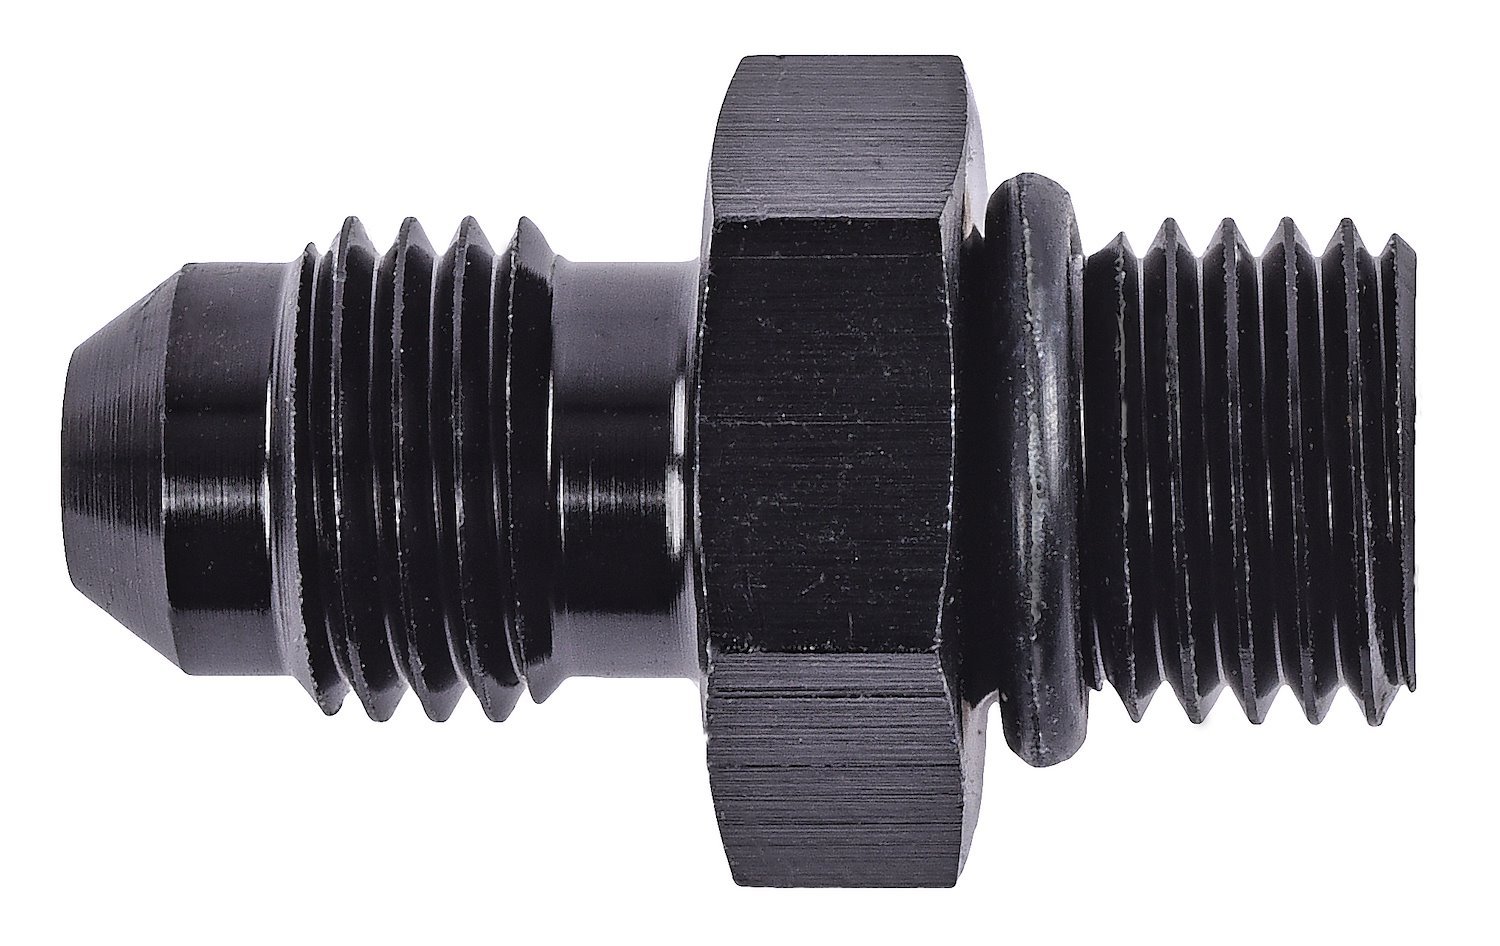 AN Port Adapter Fitting [-4 AN O-Ring Port (7/16 in.-20 Thread) To -4 AN Male, Black]